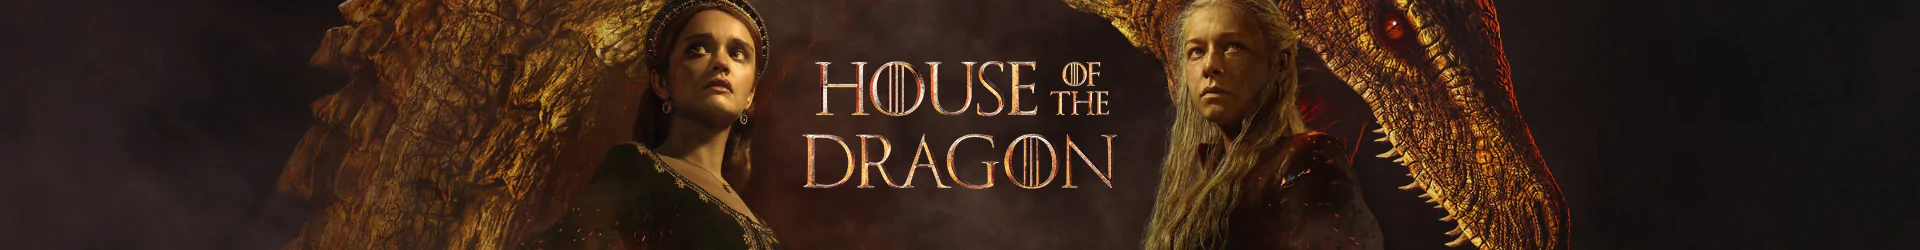 House of the Dragon puzzles banner